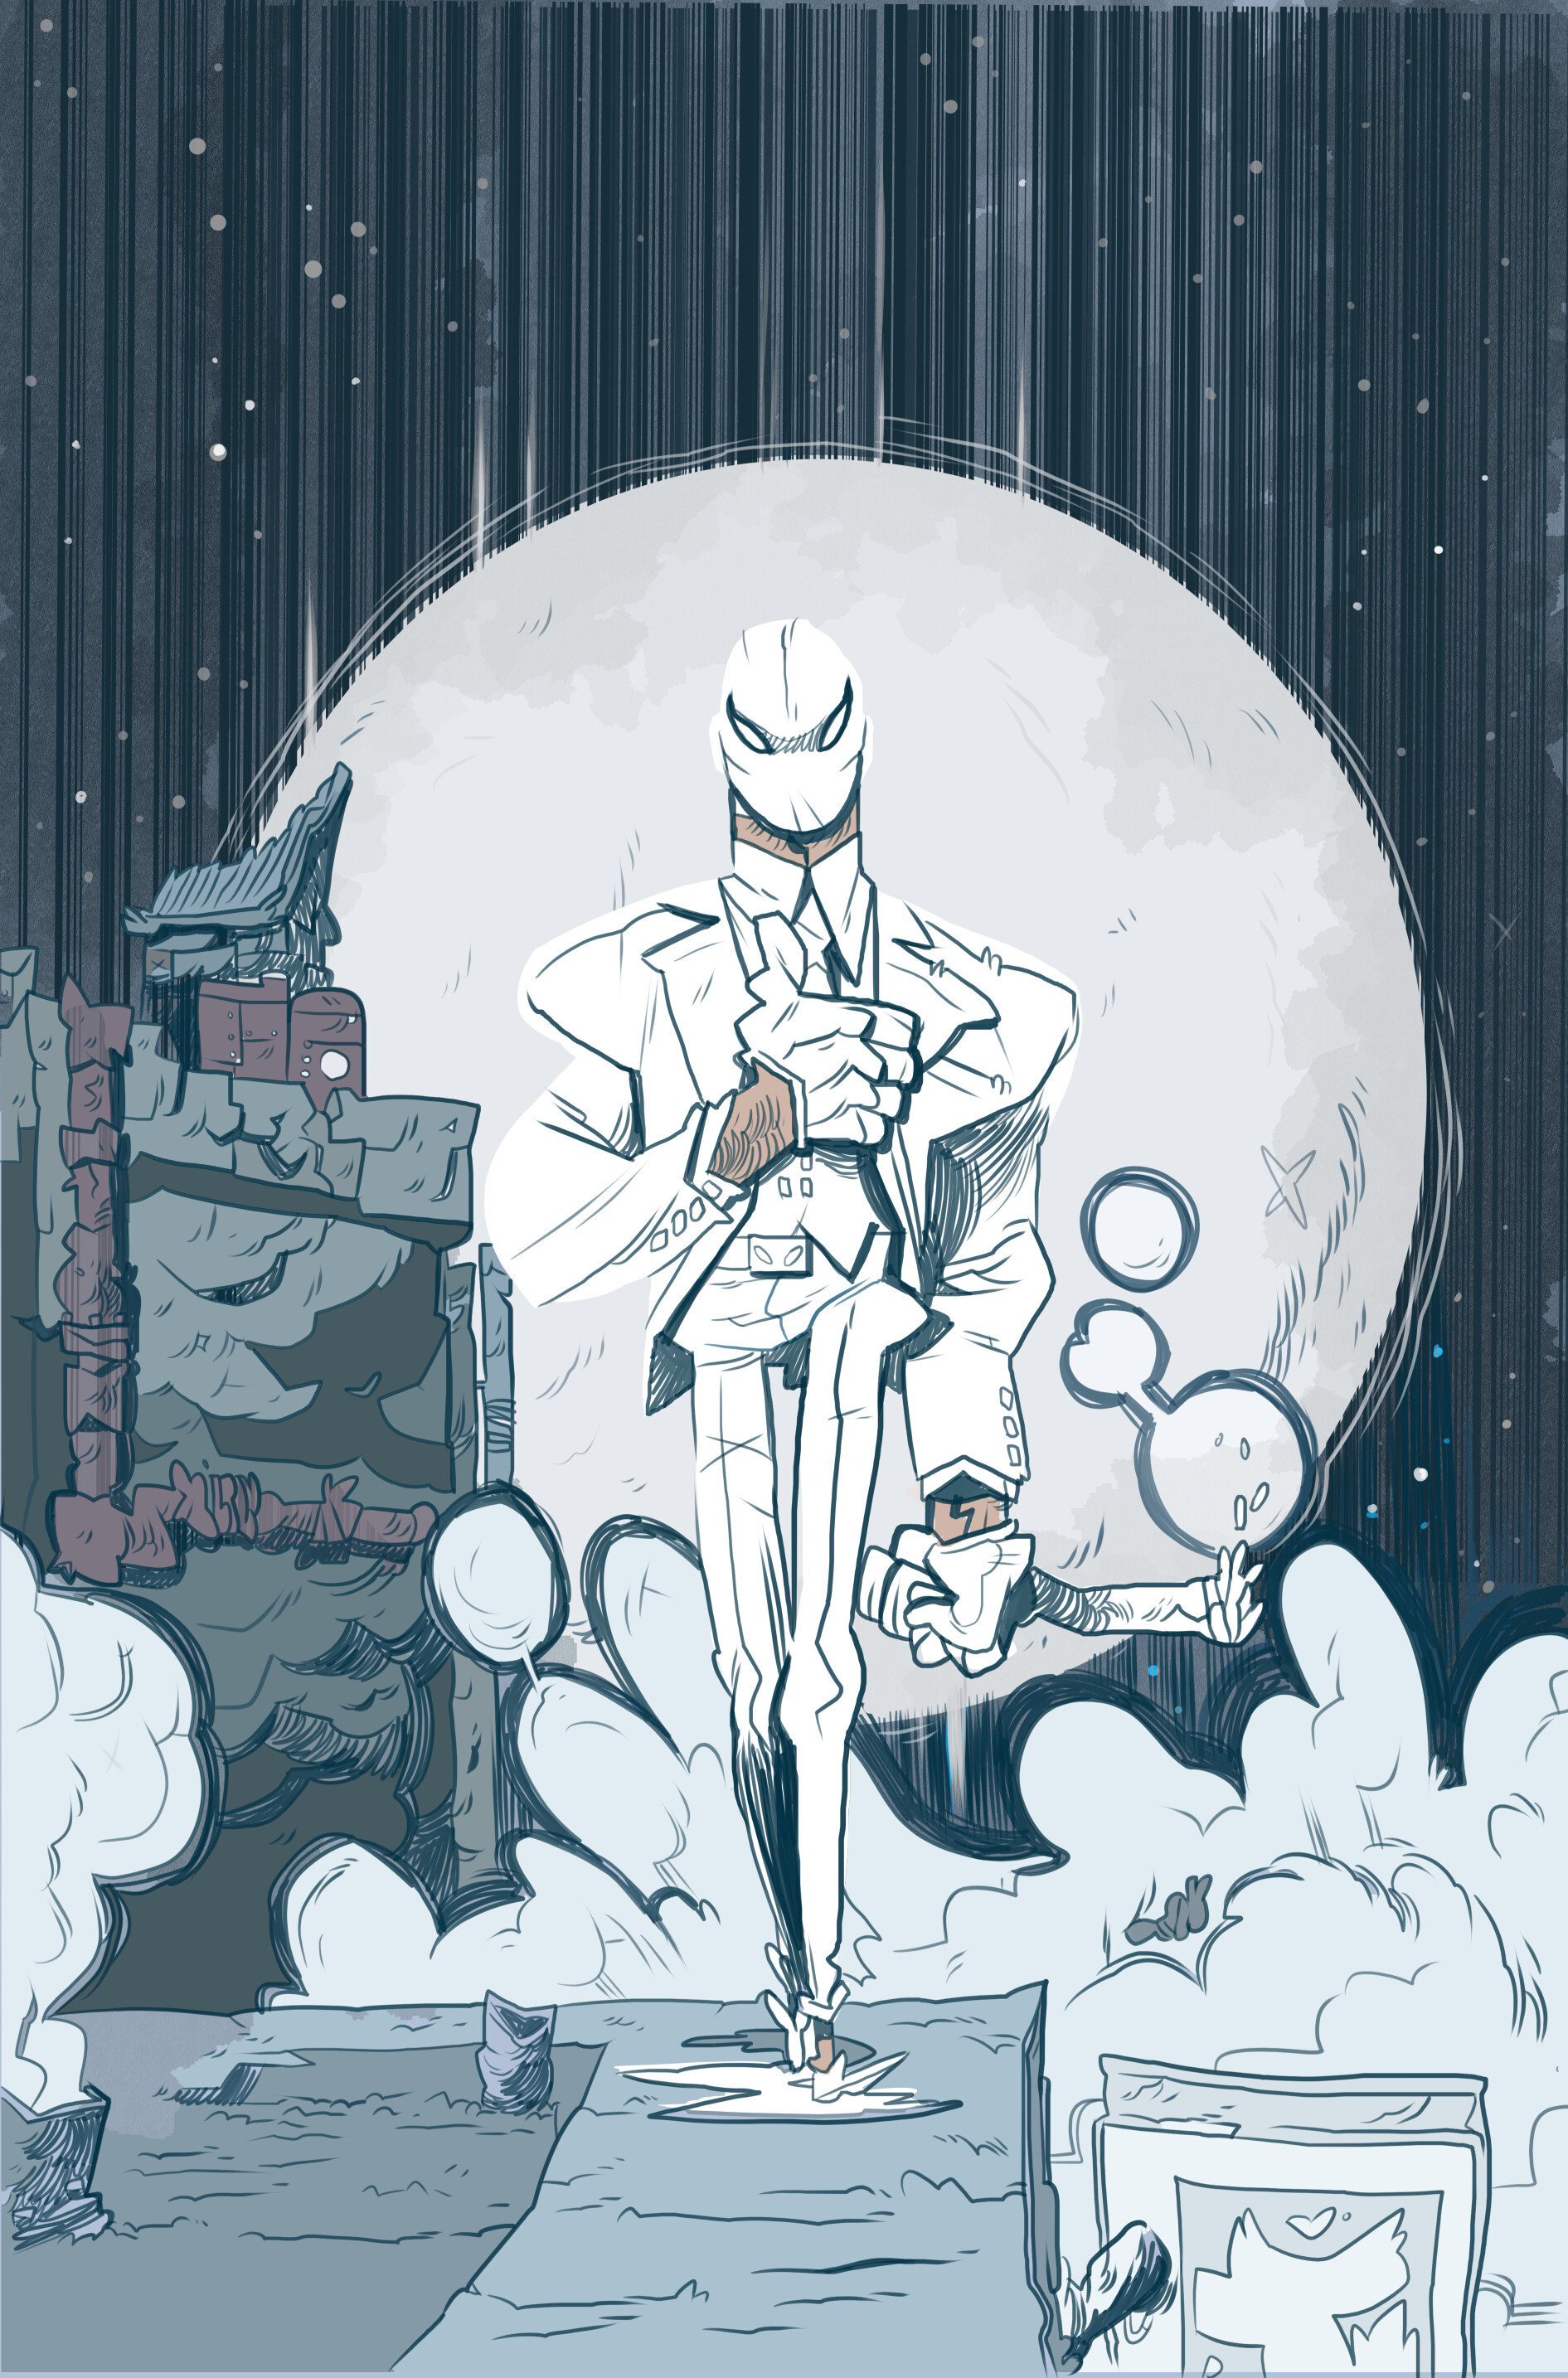 Moon mr knight knight Who is